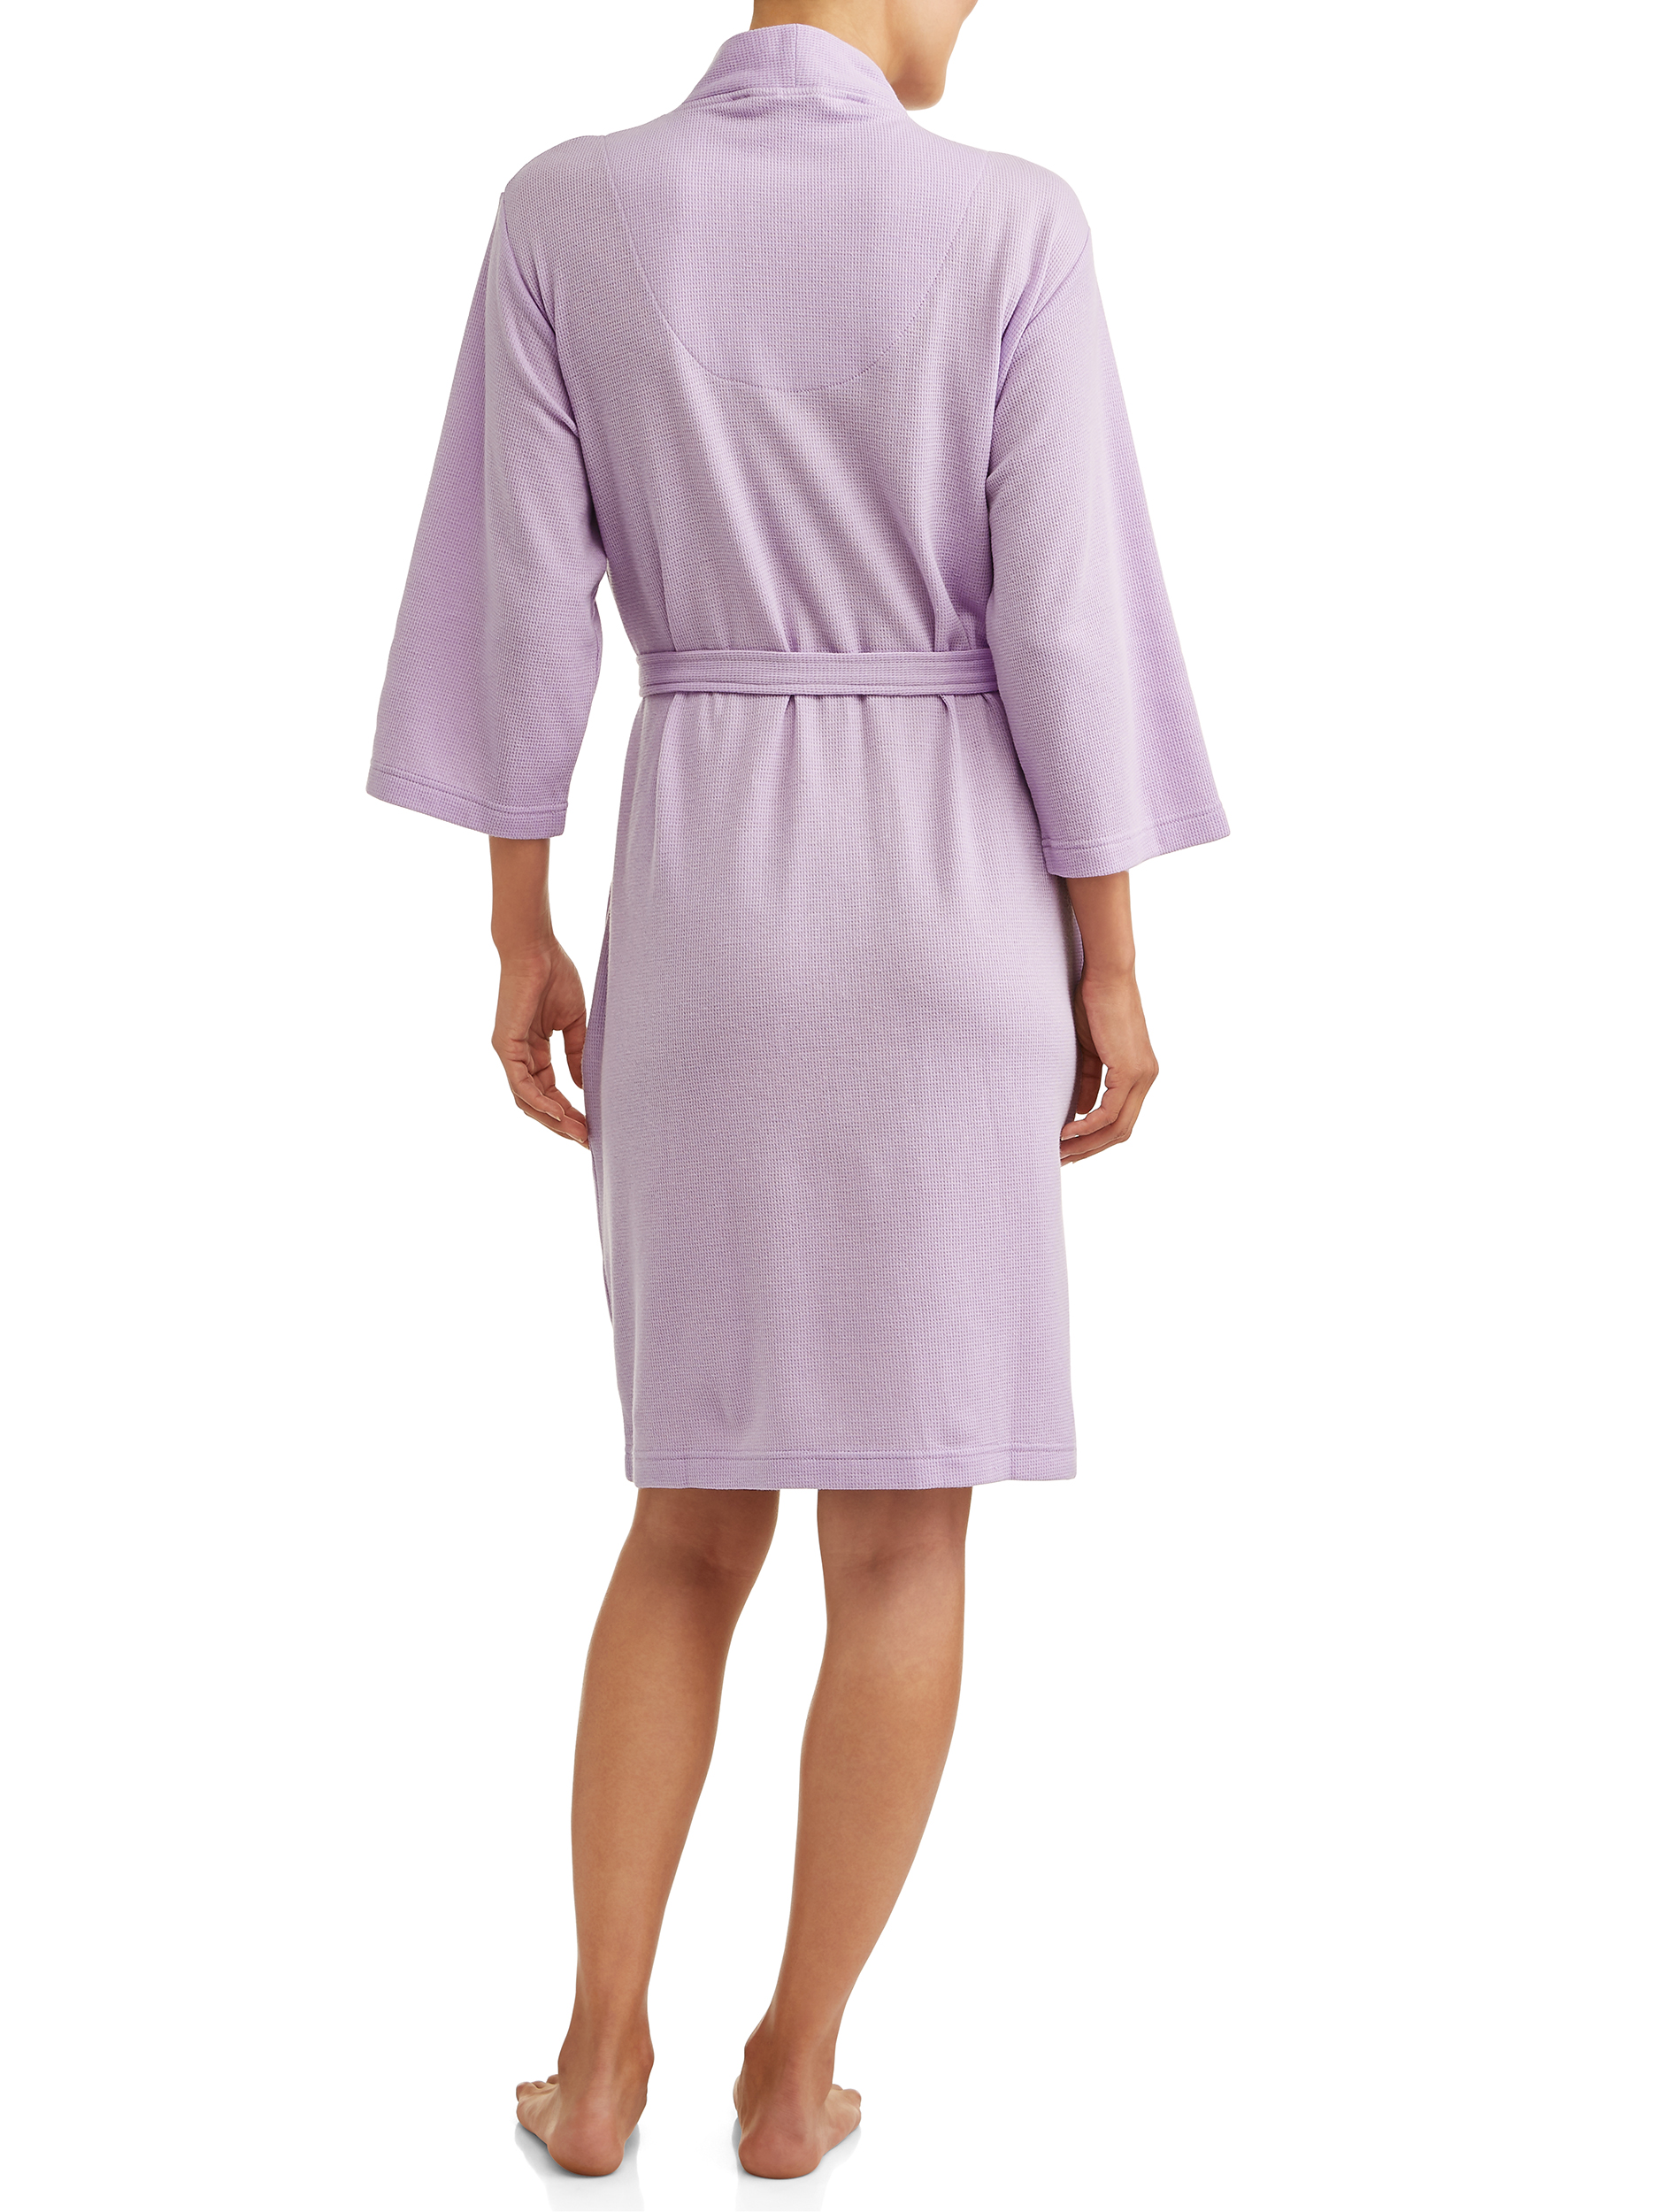 Lissome Women's and Women's Plus Waffle Wrap Robe - image 3 of 3